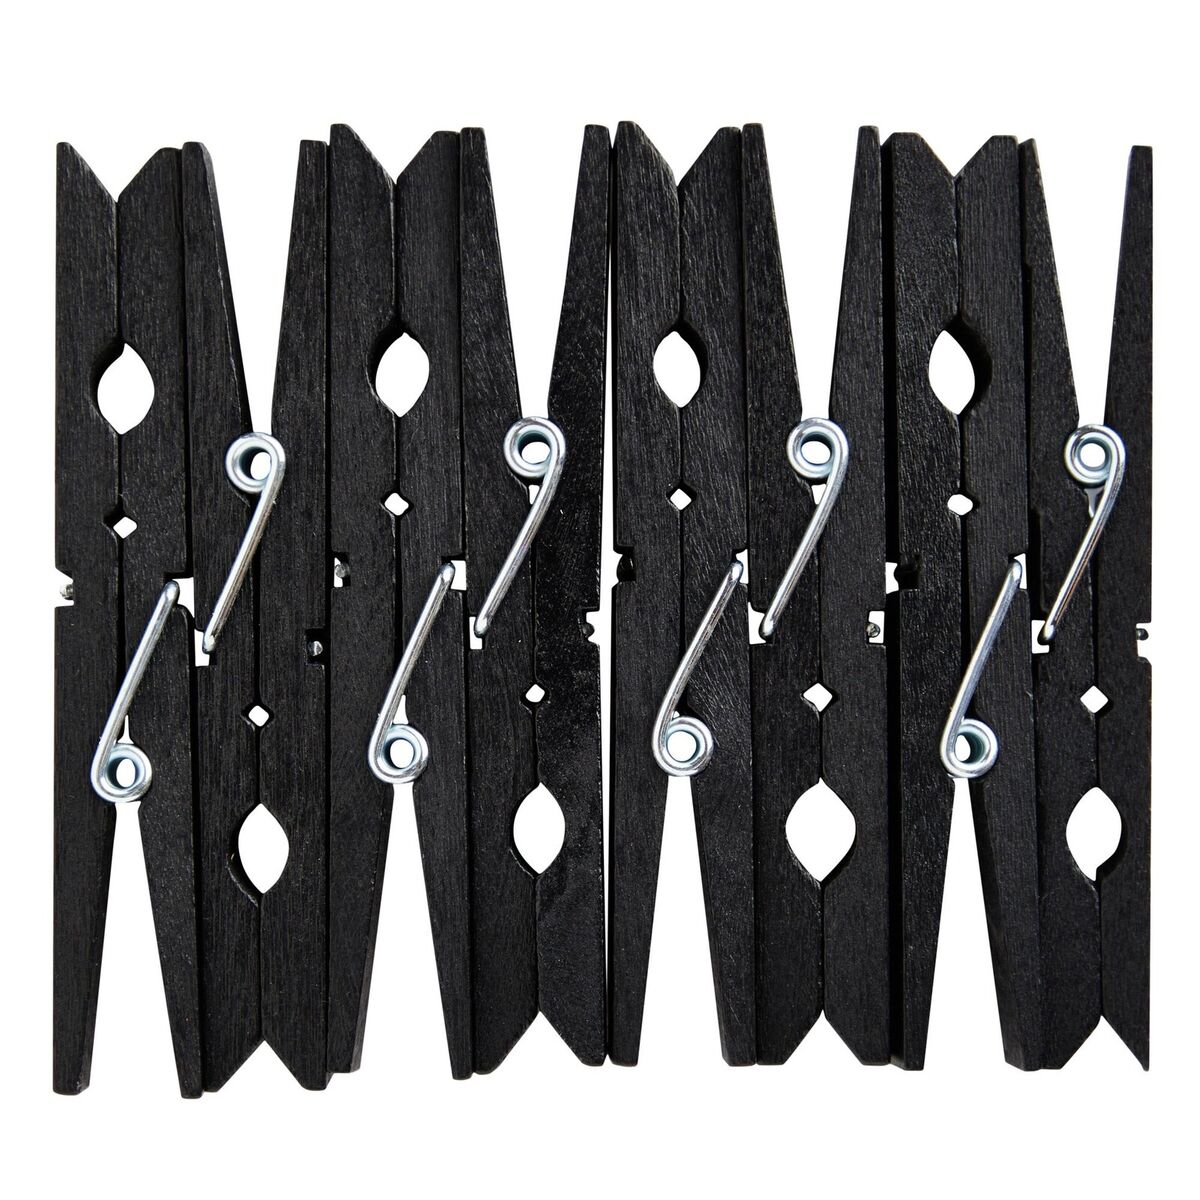 100 Pack Large Wooden Black Clothespins for Crafts, Hanging